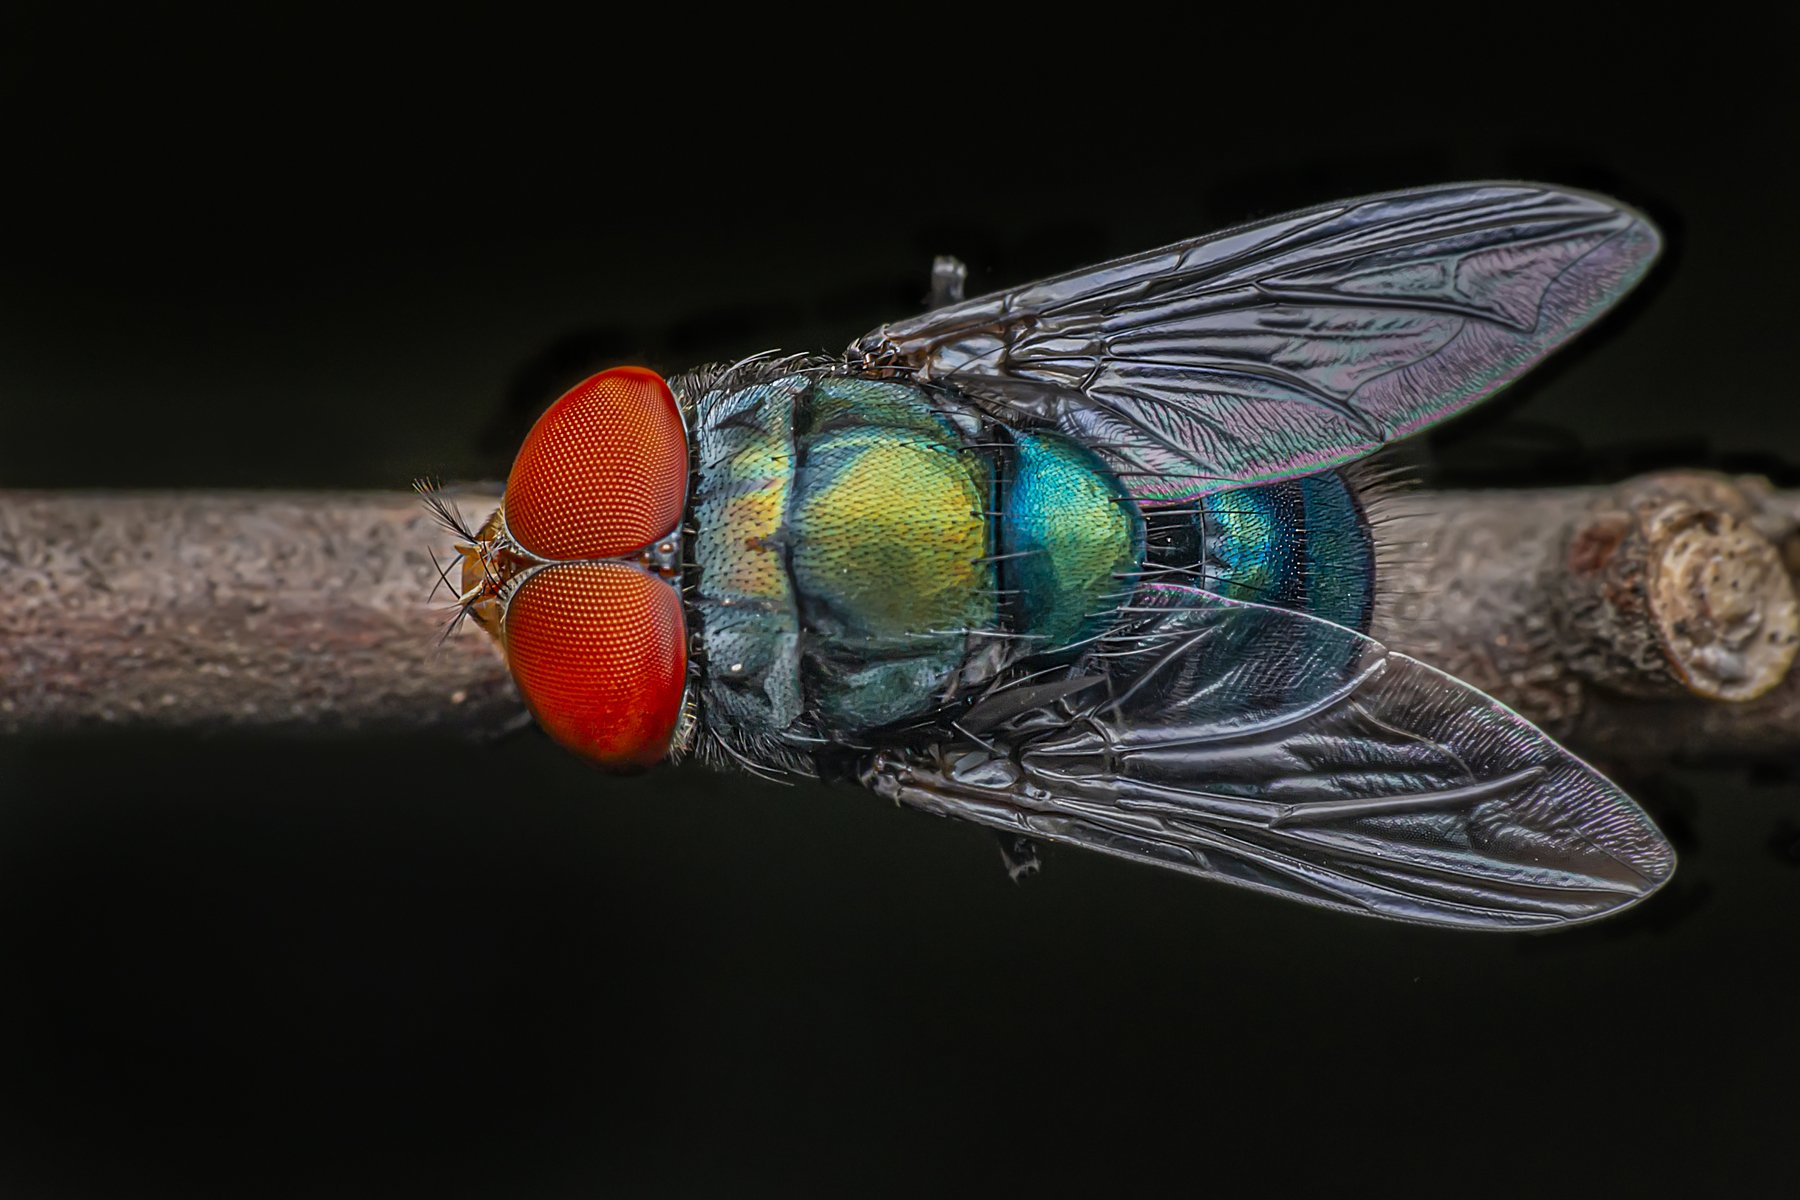 calliphoridae, garden, outdoor, macro, beauty, beautiful, red, color, blue, macro, close up, animal, insect, eyes, fly, wings, NeCoTi ChonTin